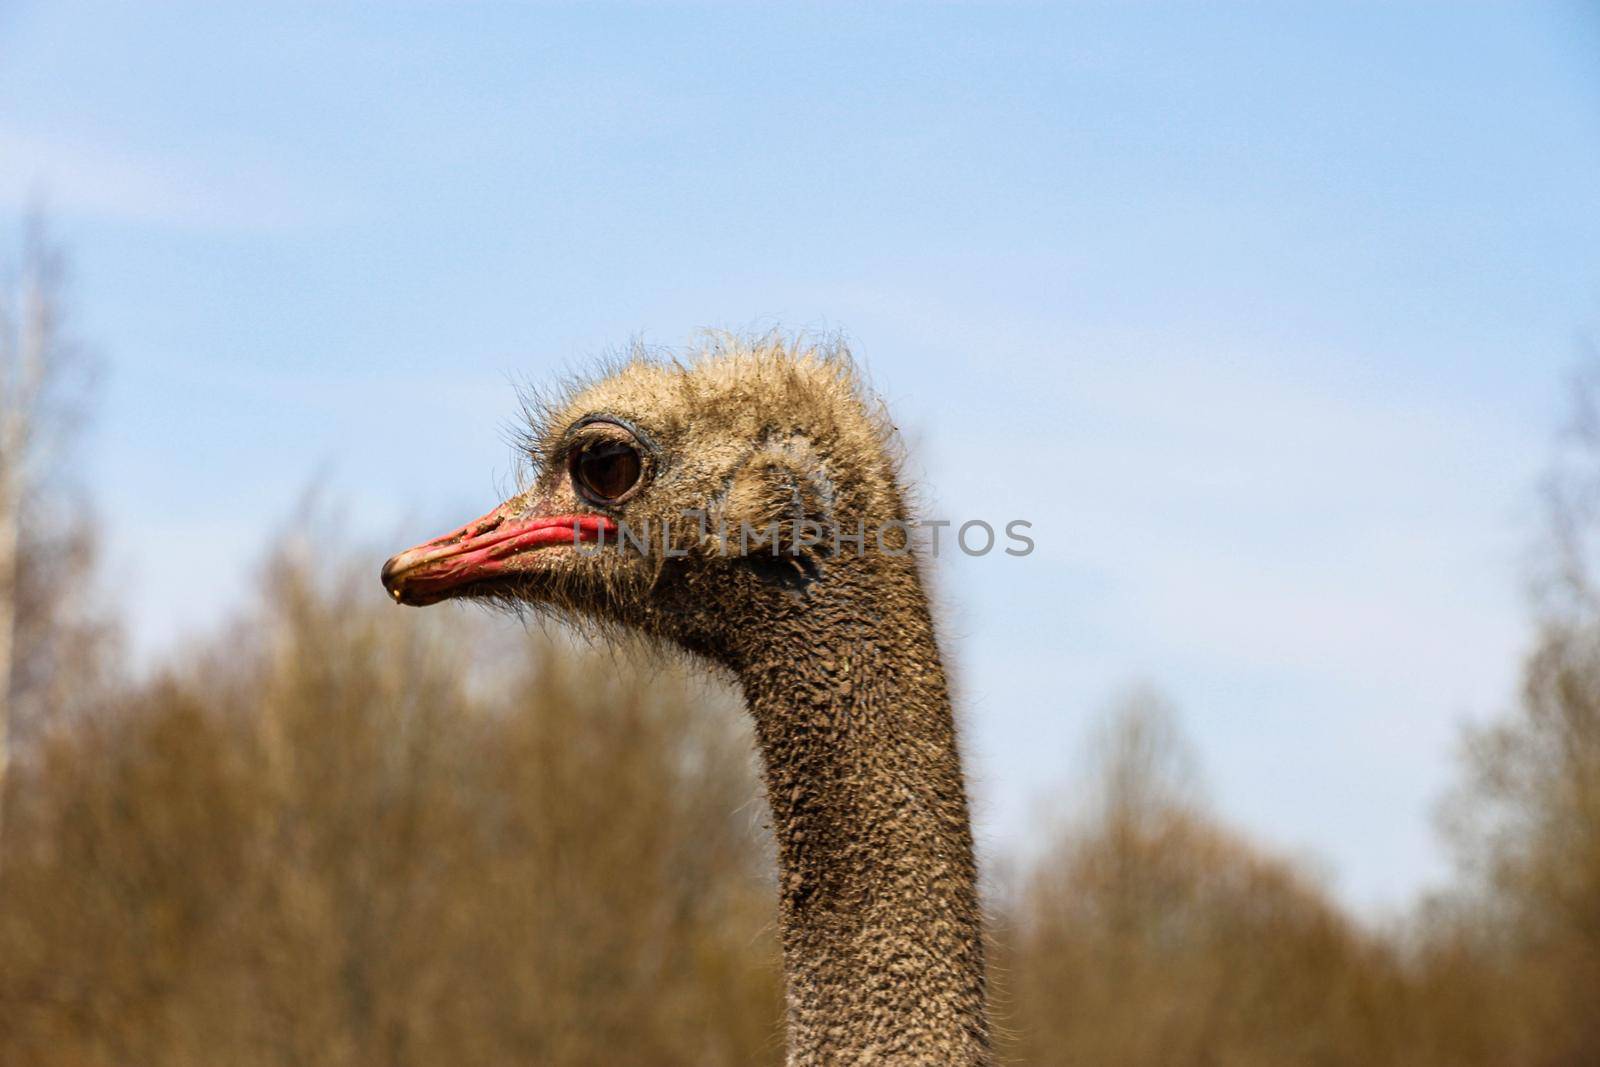 Ostrich head shot close-up on the background of the forest and sky. High quality photo